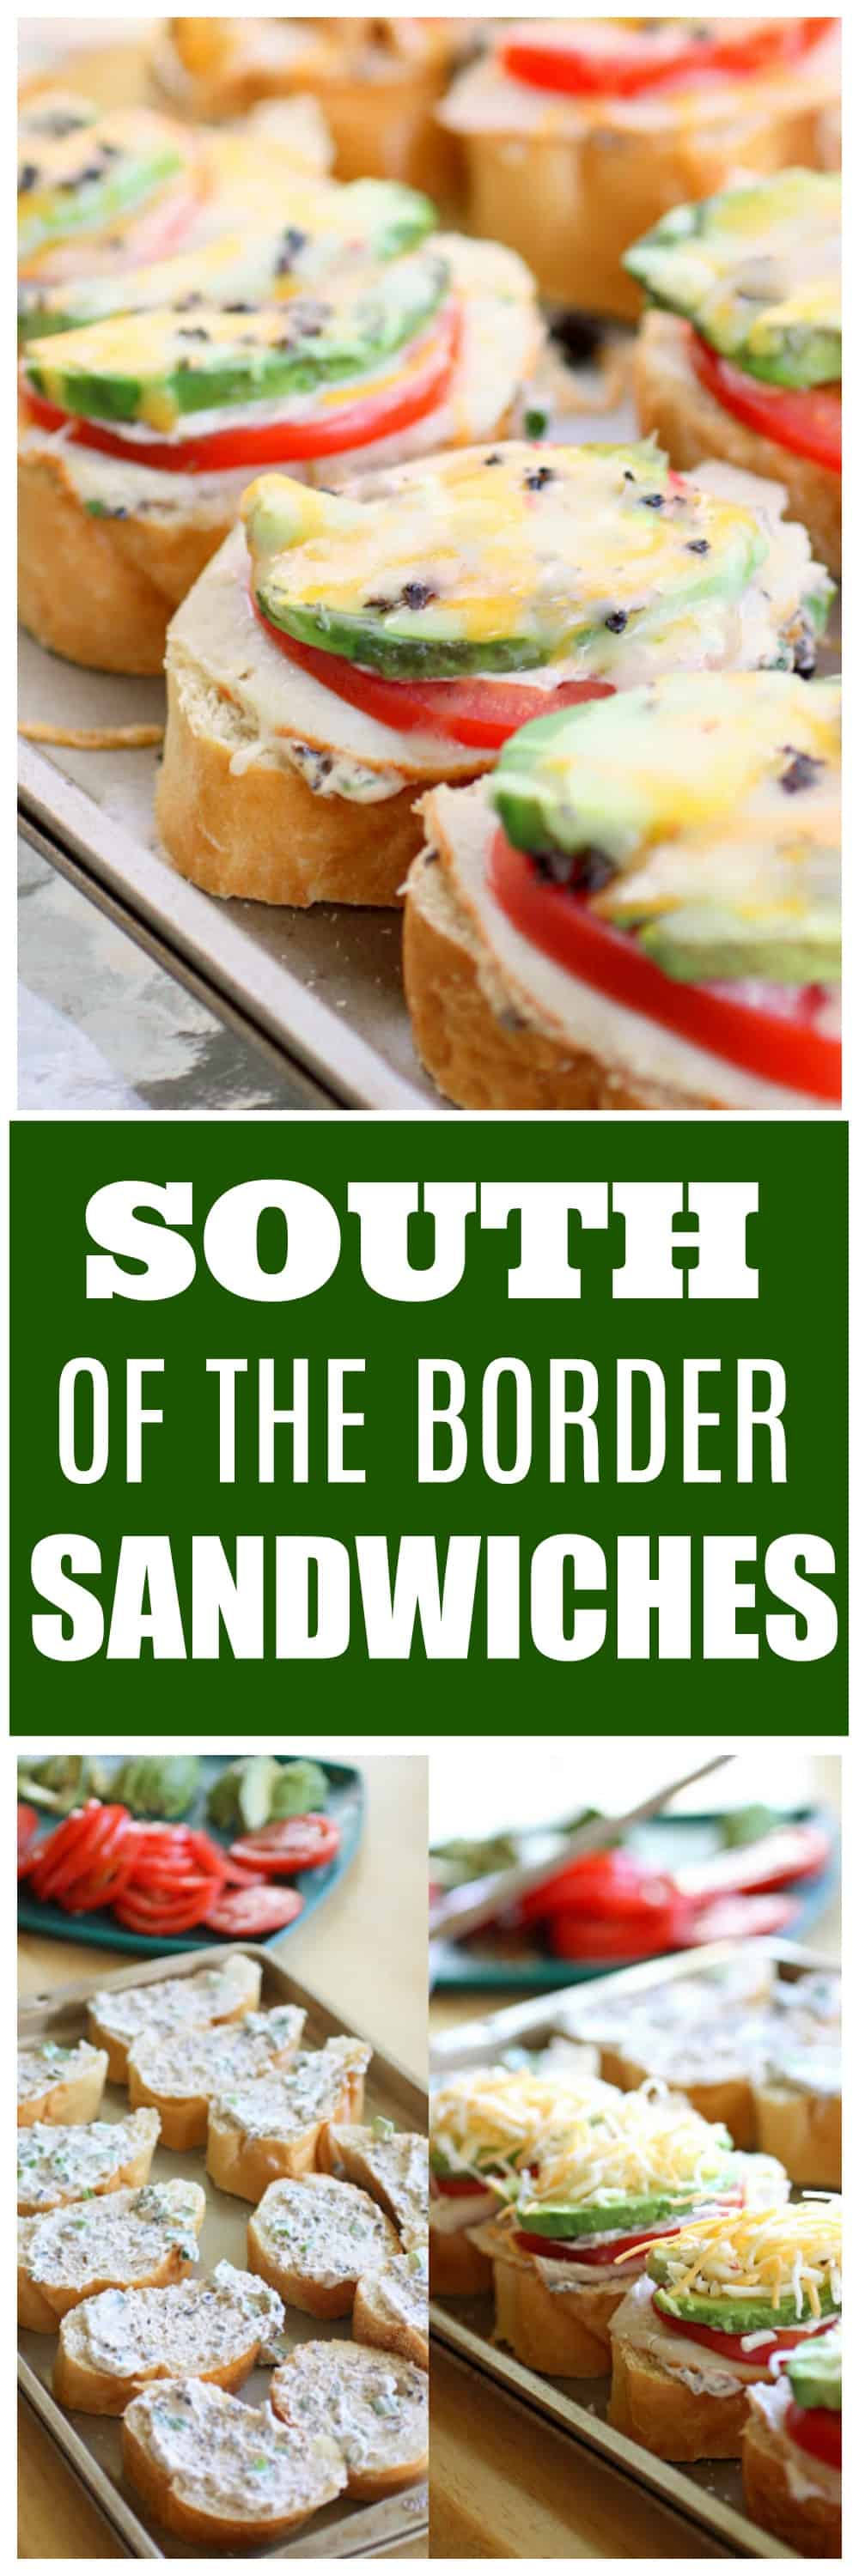 South of the Border Sandwiches - The Girl Who Ate Everything